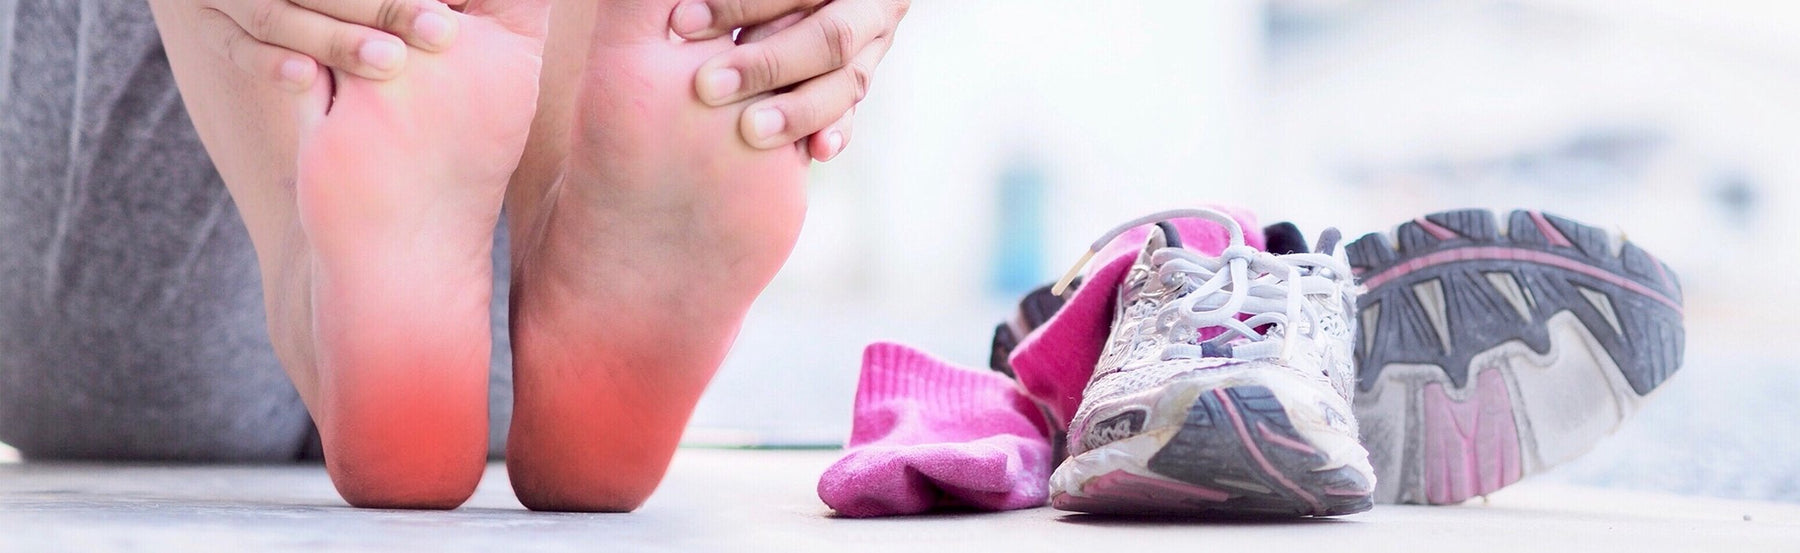 Seven Home Methods to Treat or Relieve Plantar Fasciitis